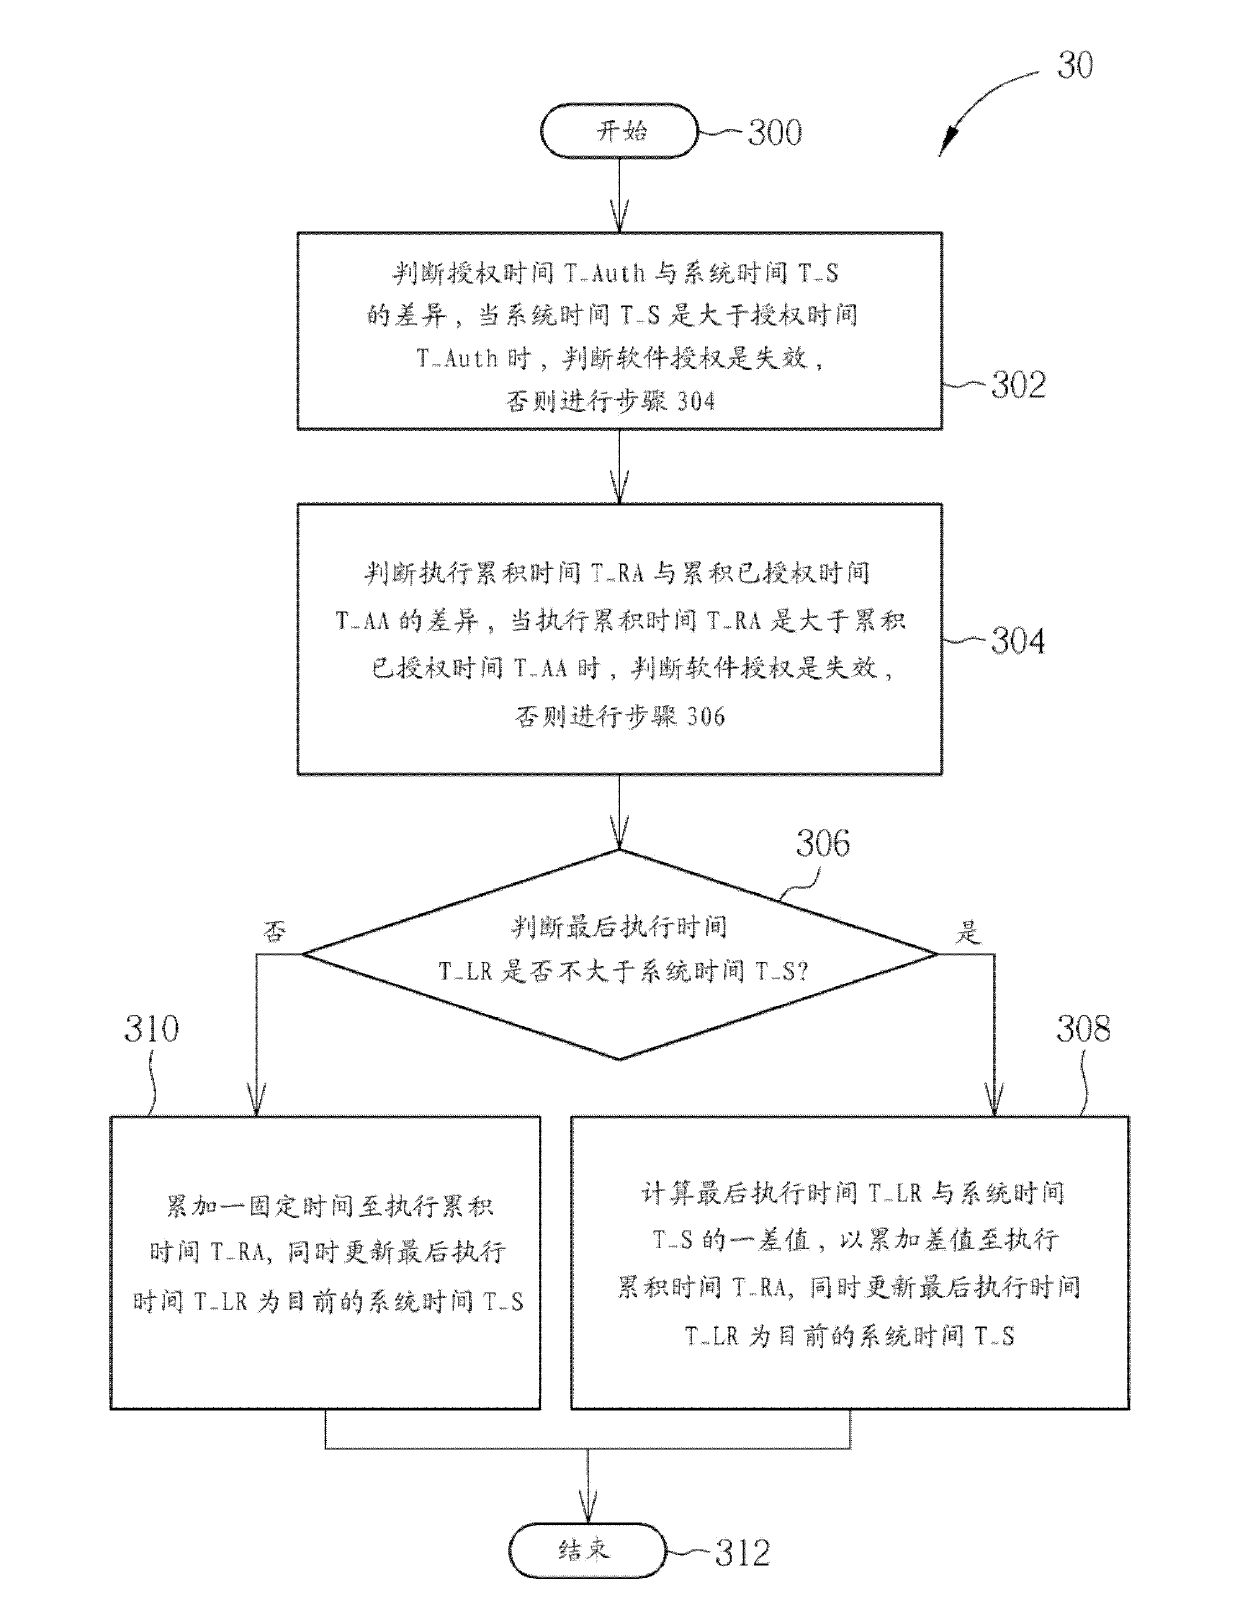 Method and system for protecting software authorization